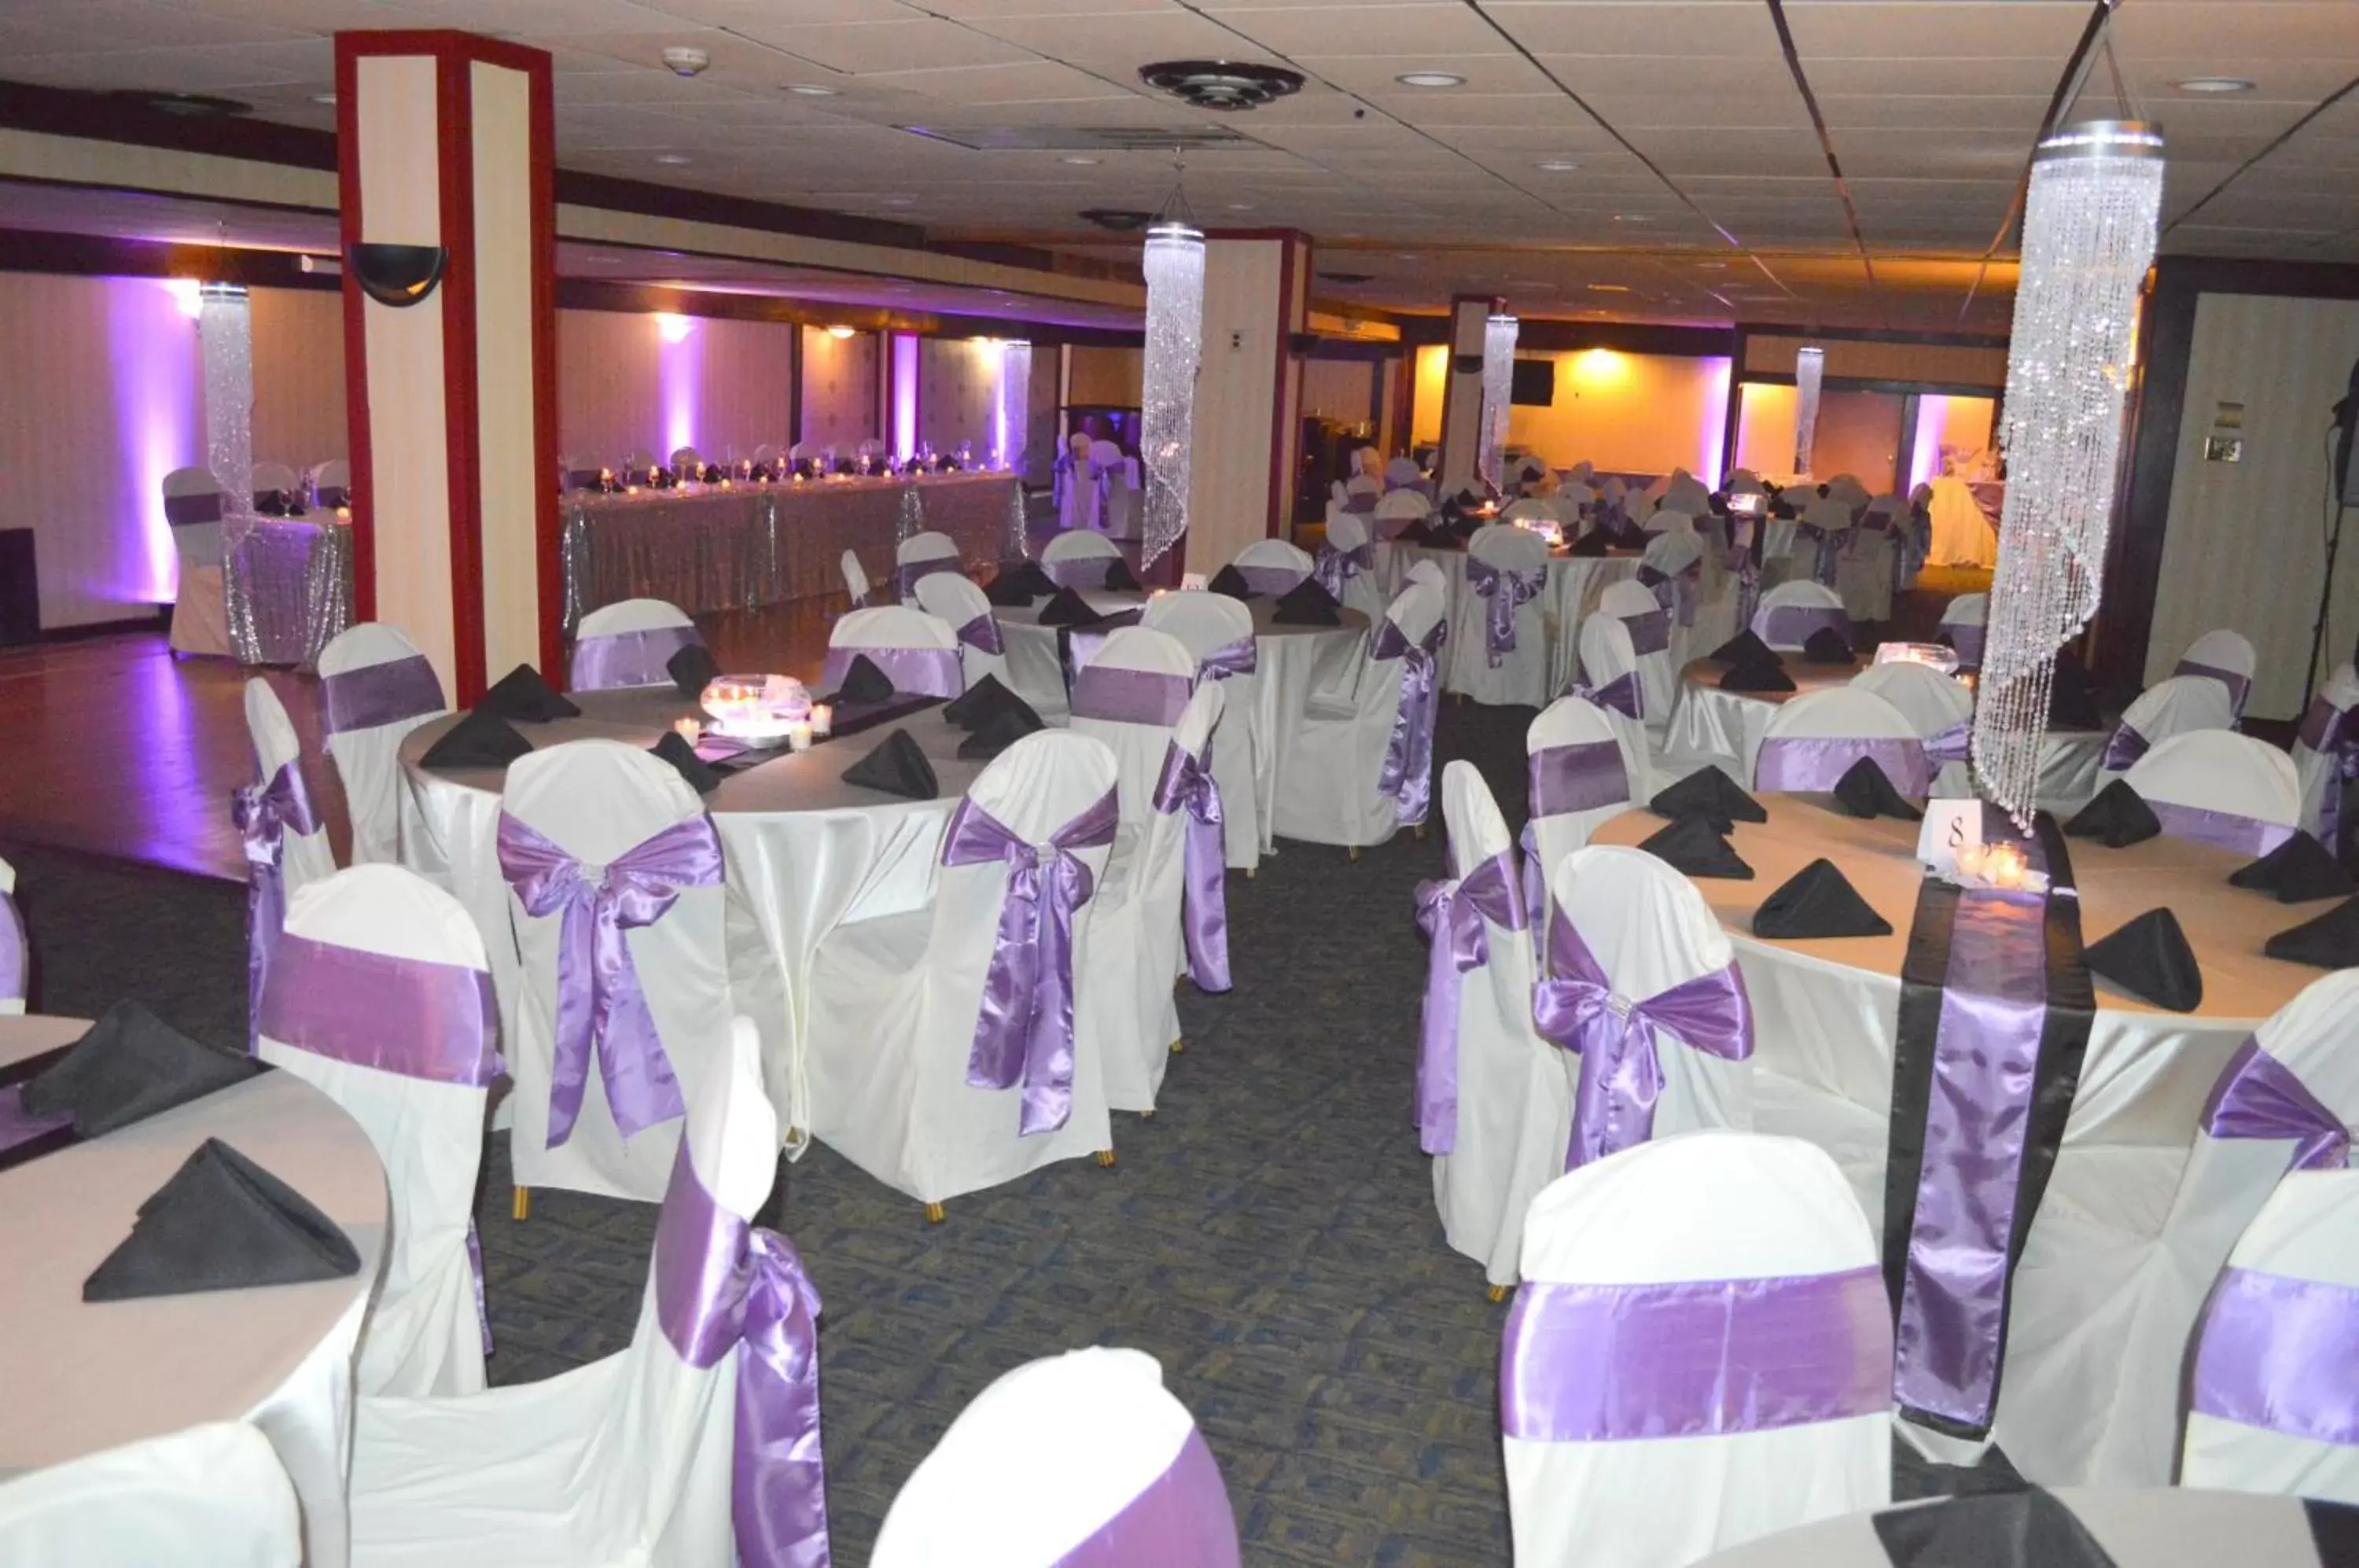 Banquet/Function facilities, Banquet Facilities in Days Inn by Wyndham Pittsburgh